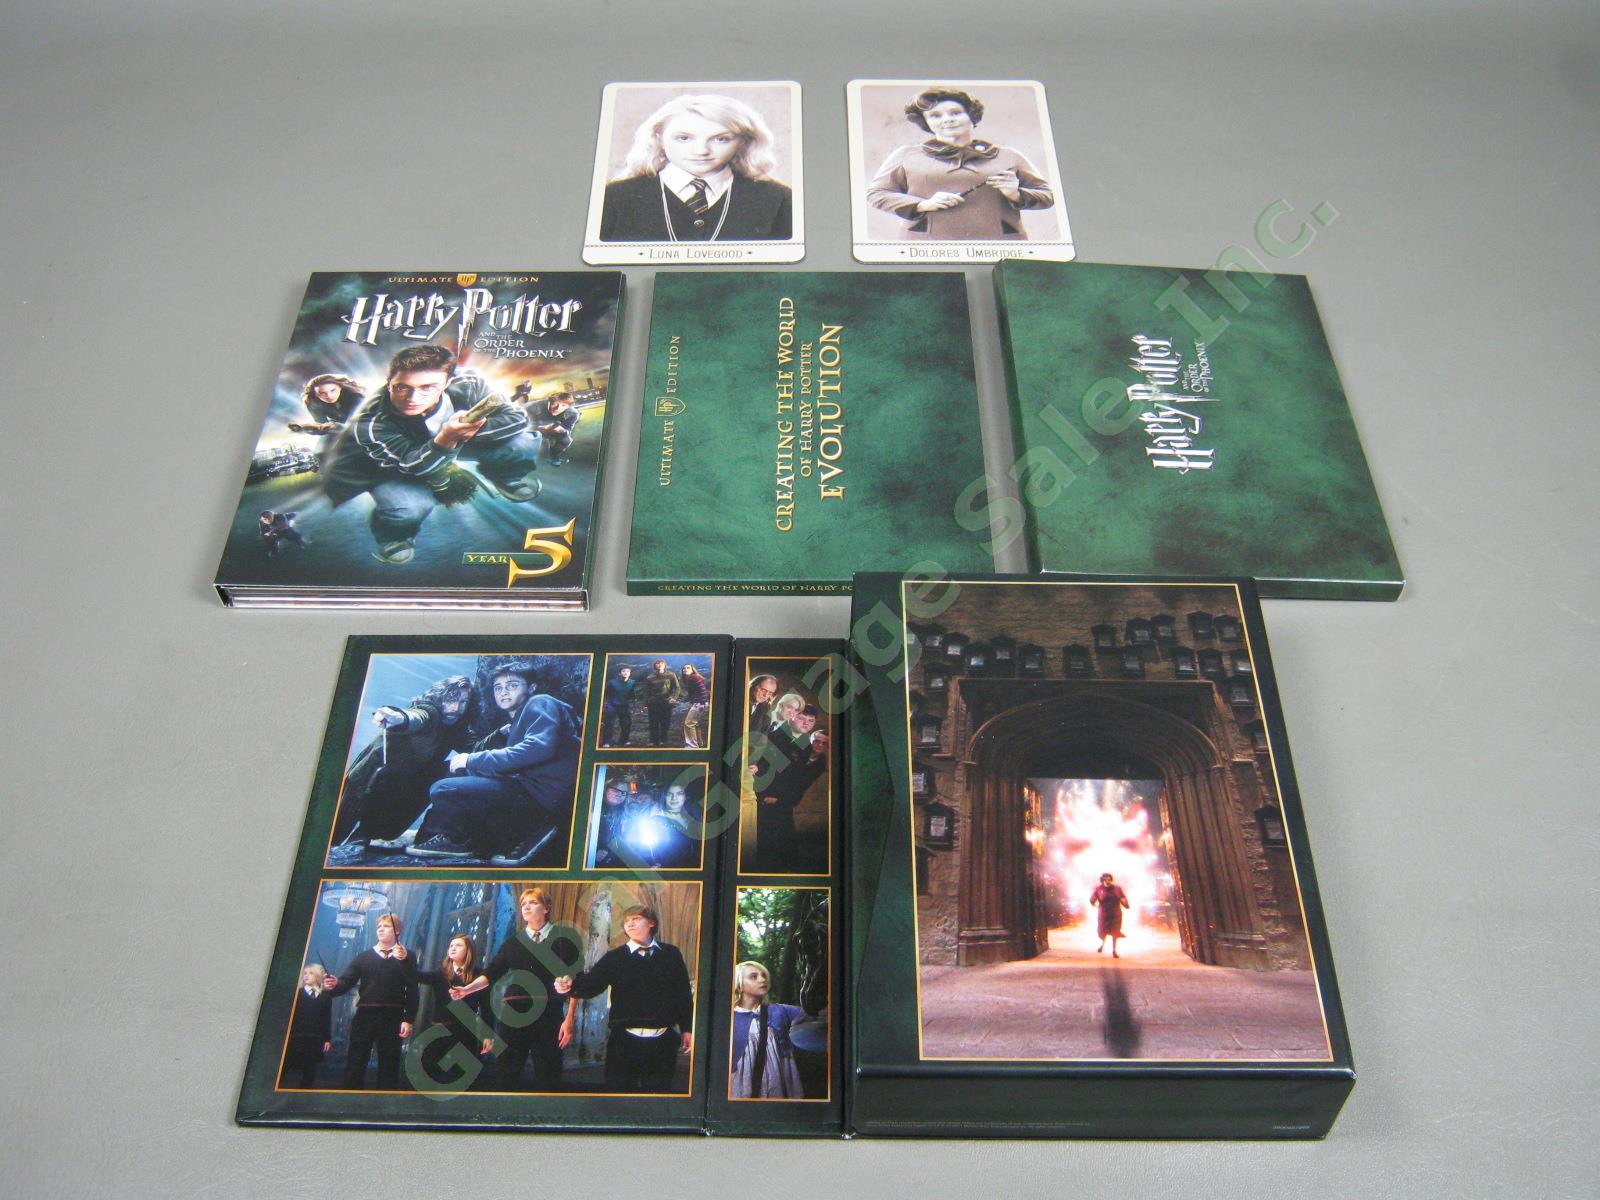 Complete Set Of 7 Harry Potter Ultimate Edition Blu-Ray Movies W/ Boxes Booklets 7